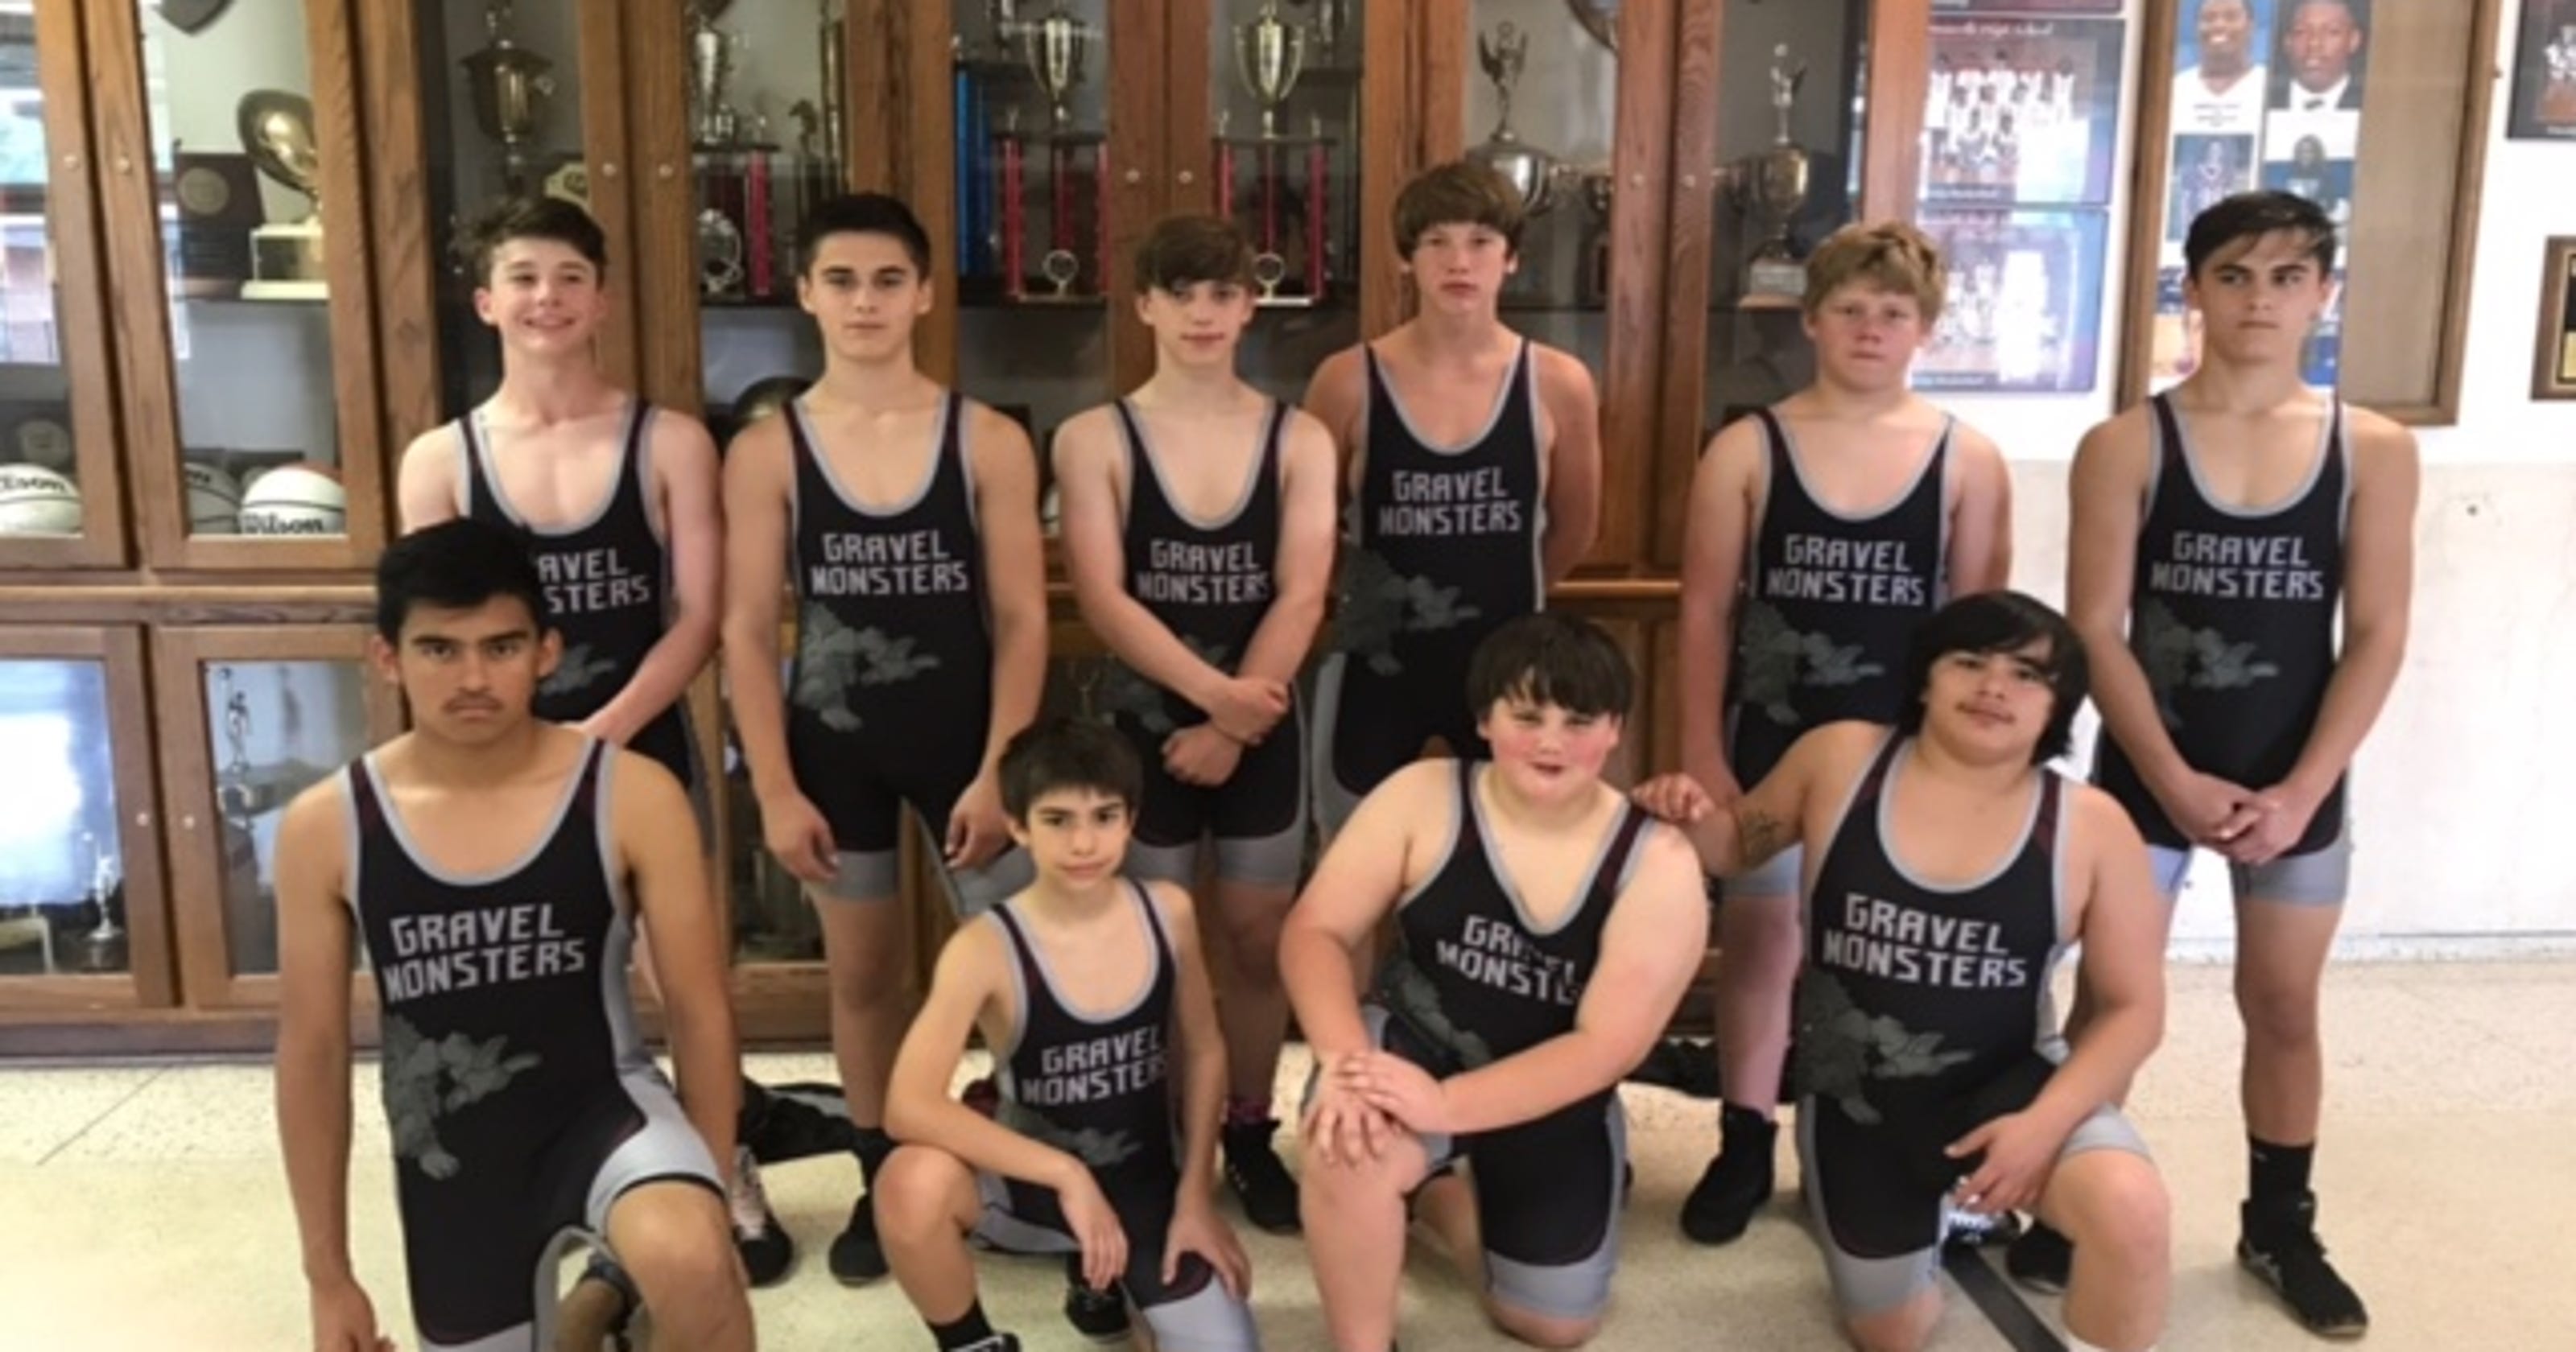 Wrestling heats up the gym at Owen Middle School